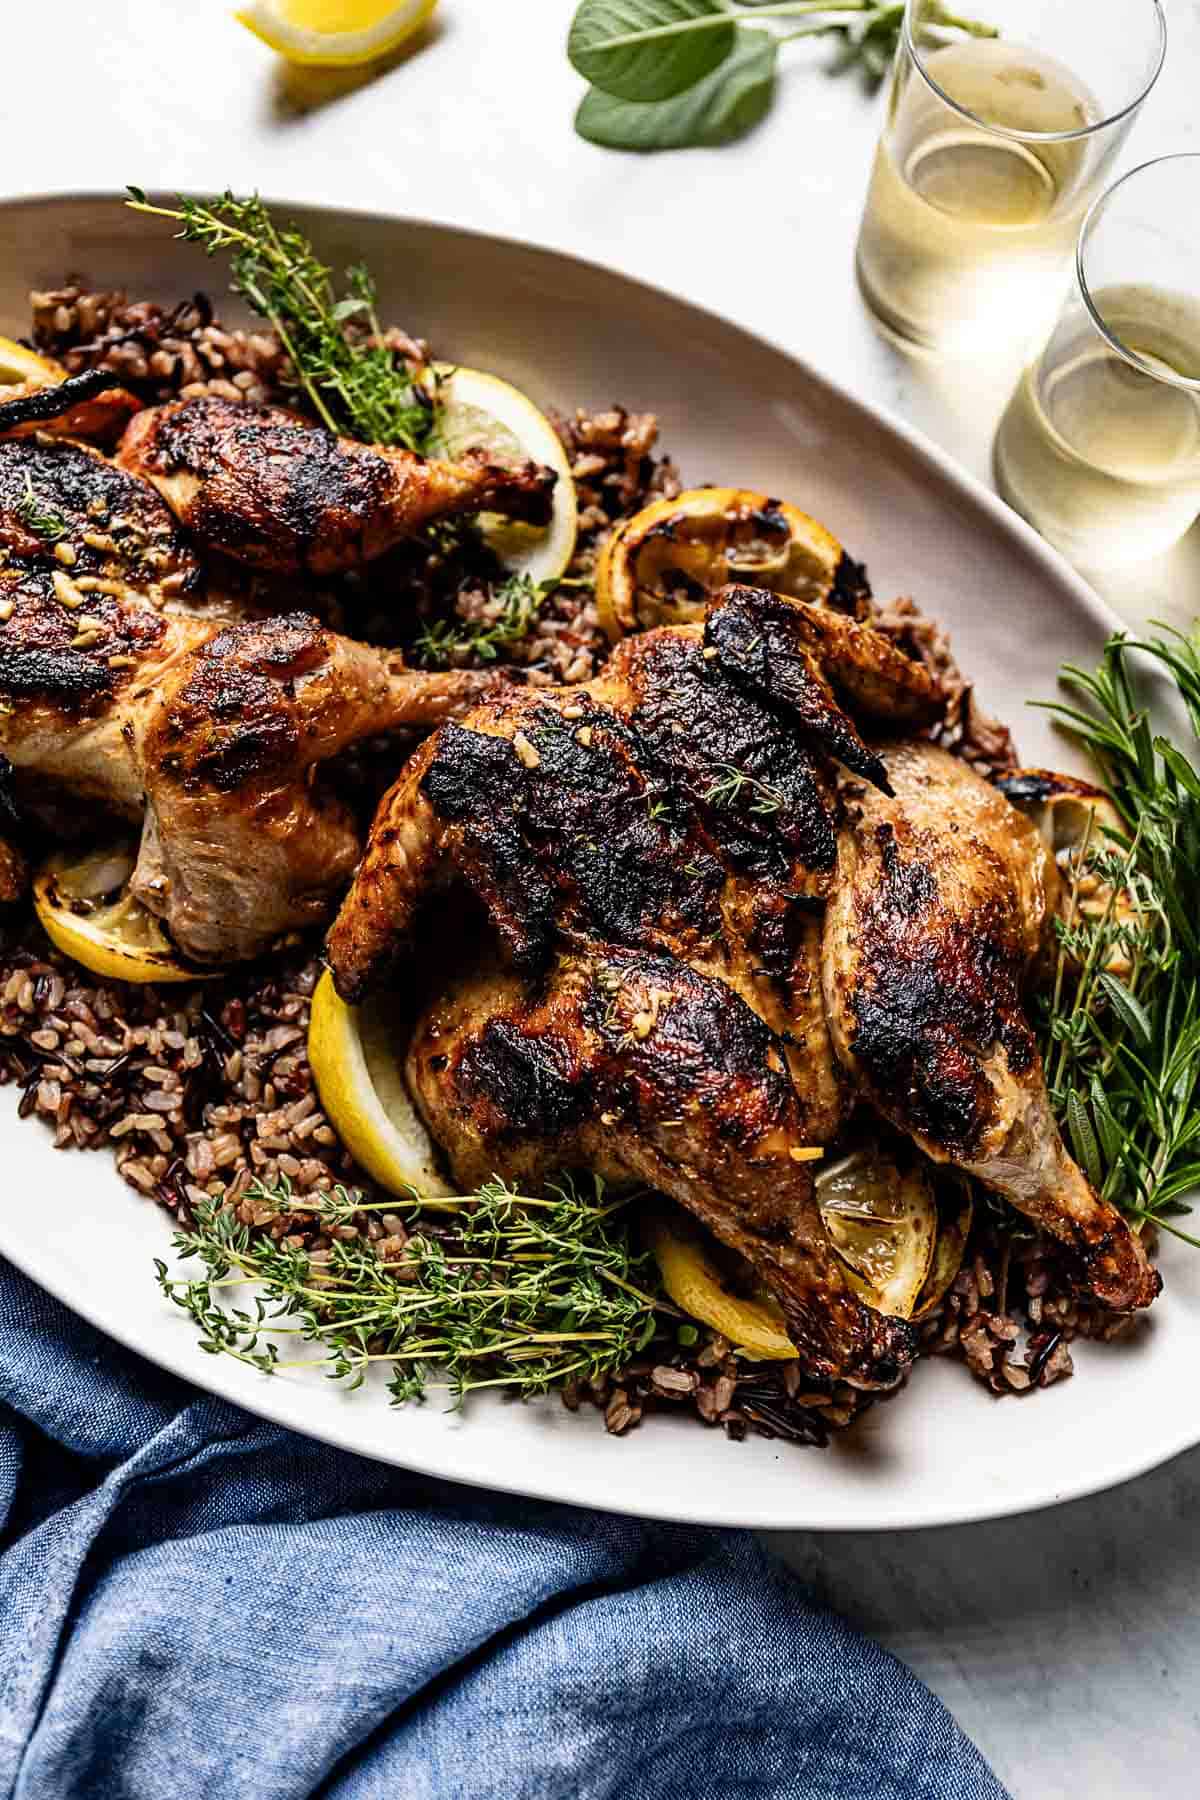 Grilled Cornish game hens on a bed of wild rice.